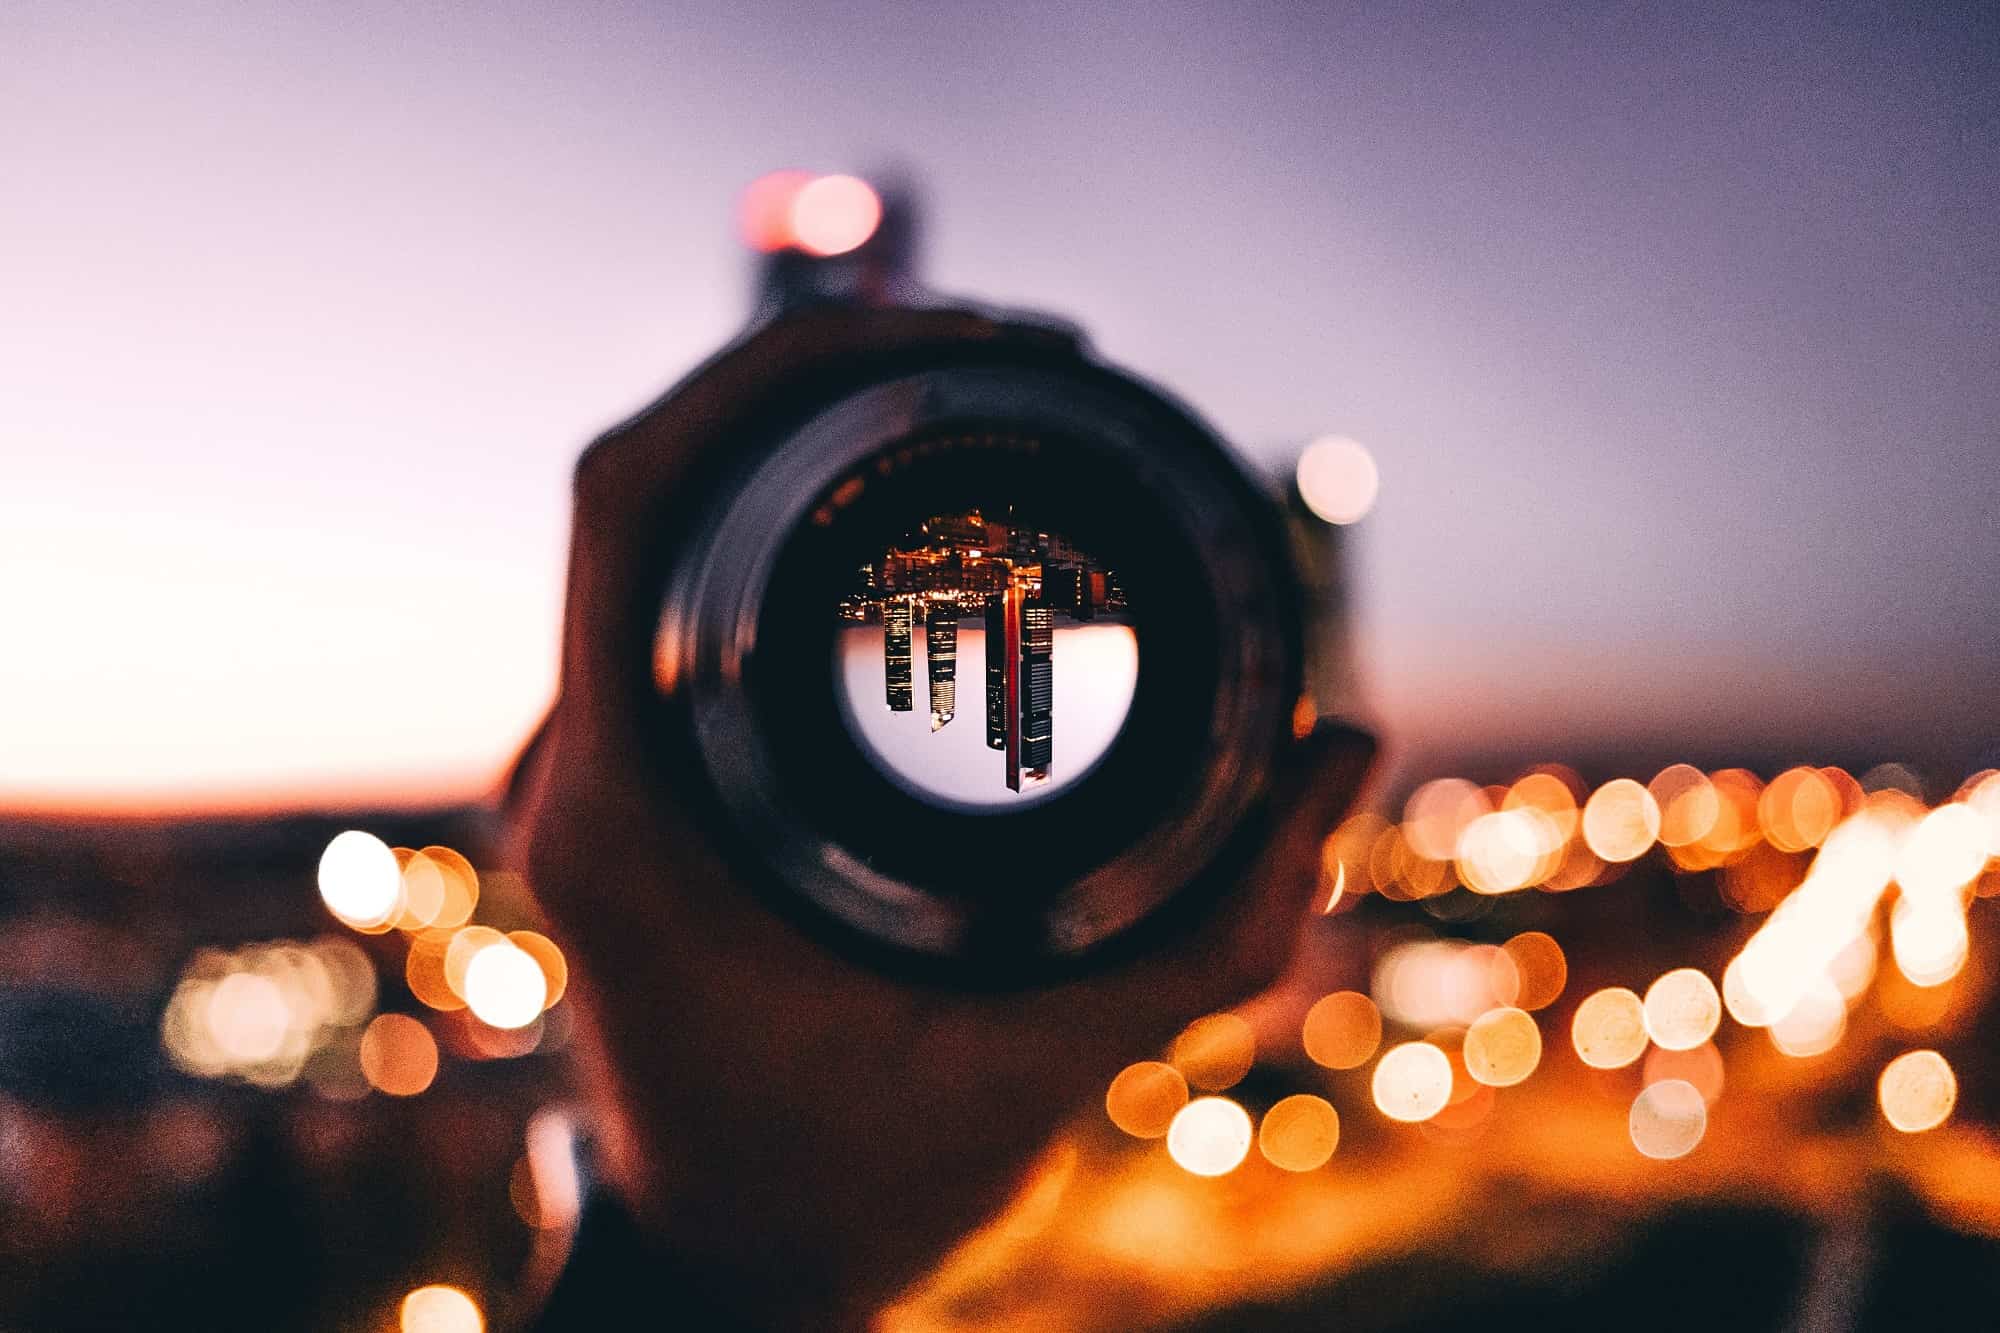 Camera lens in hand by night